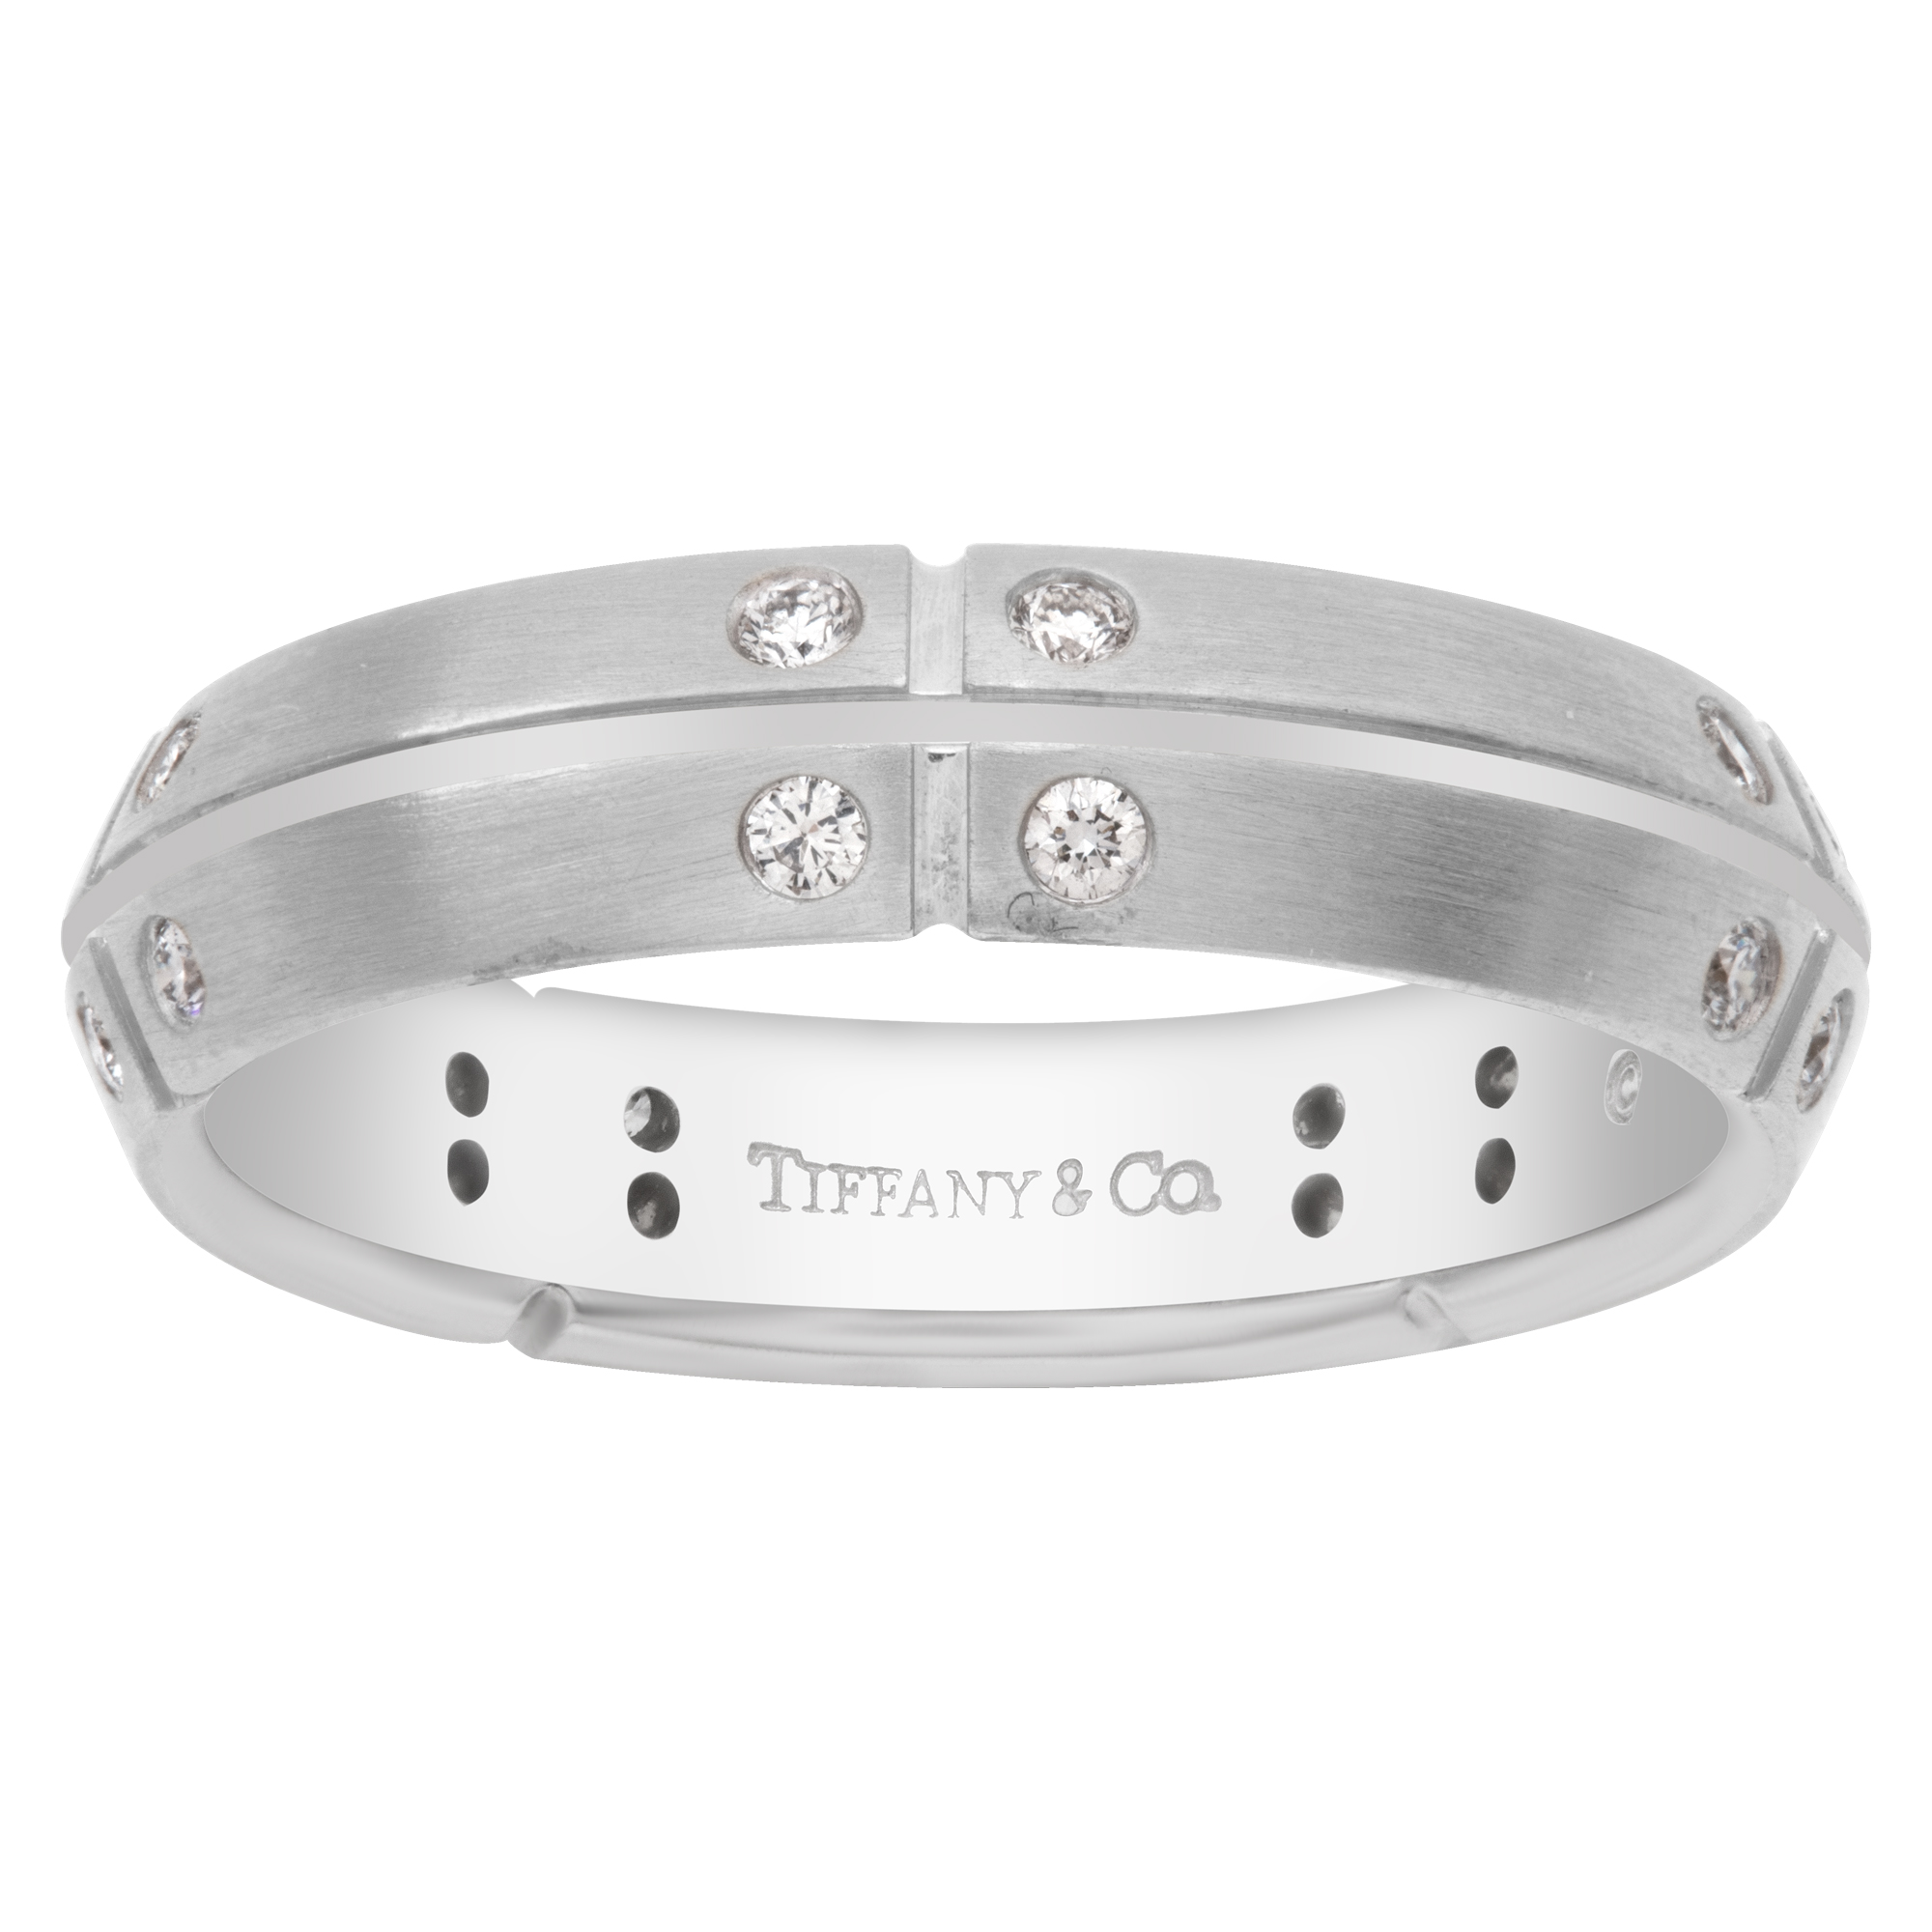 Tiffany & Co. Streamerica band with Diamonds 0.20 carat in 18k white gold. Size 8.5.